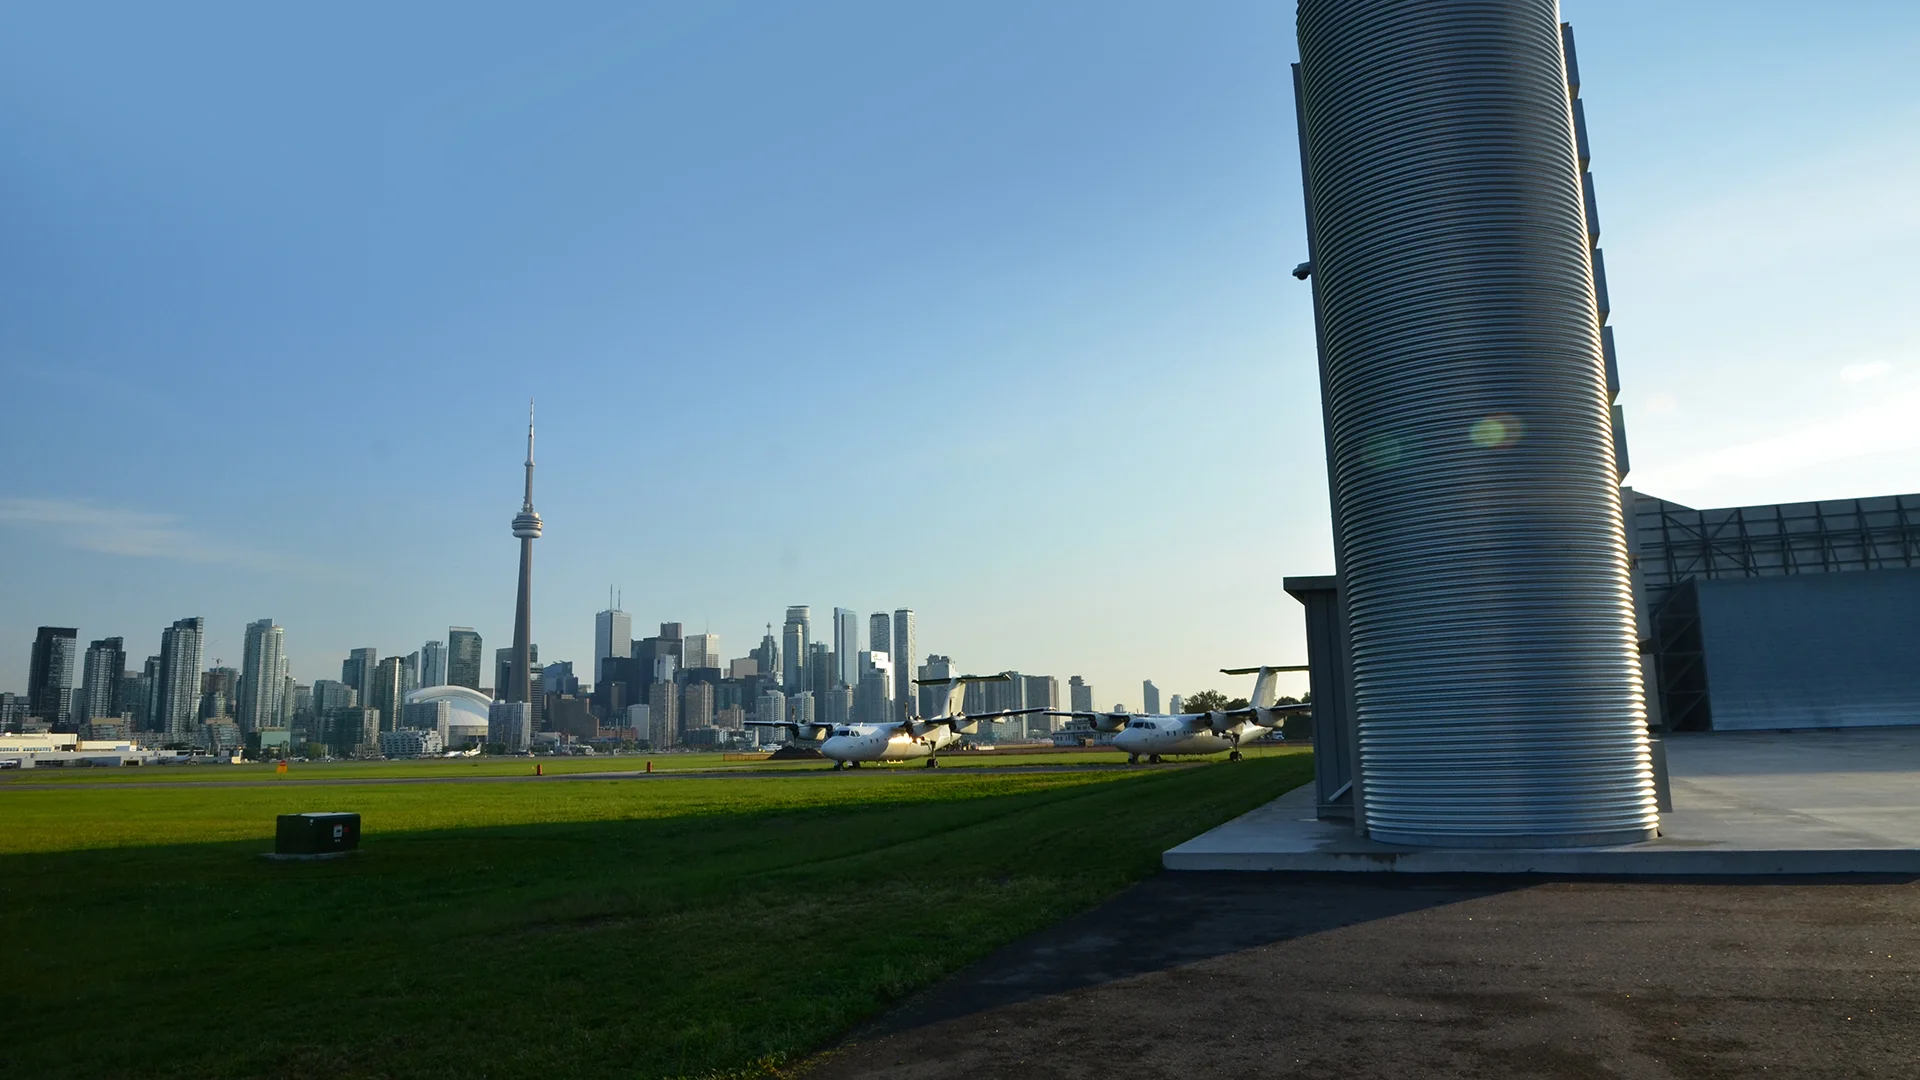 Noise barrier in foreground with the airport and the city of Toronto in the background